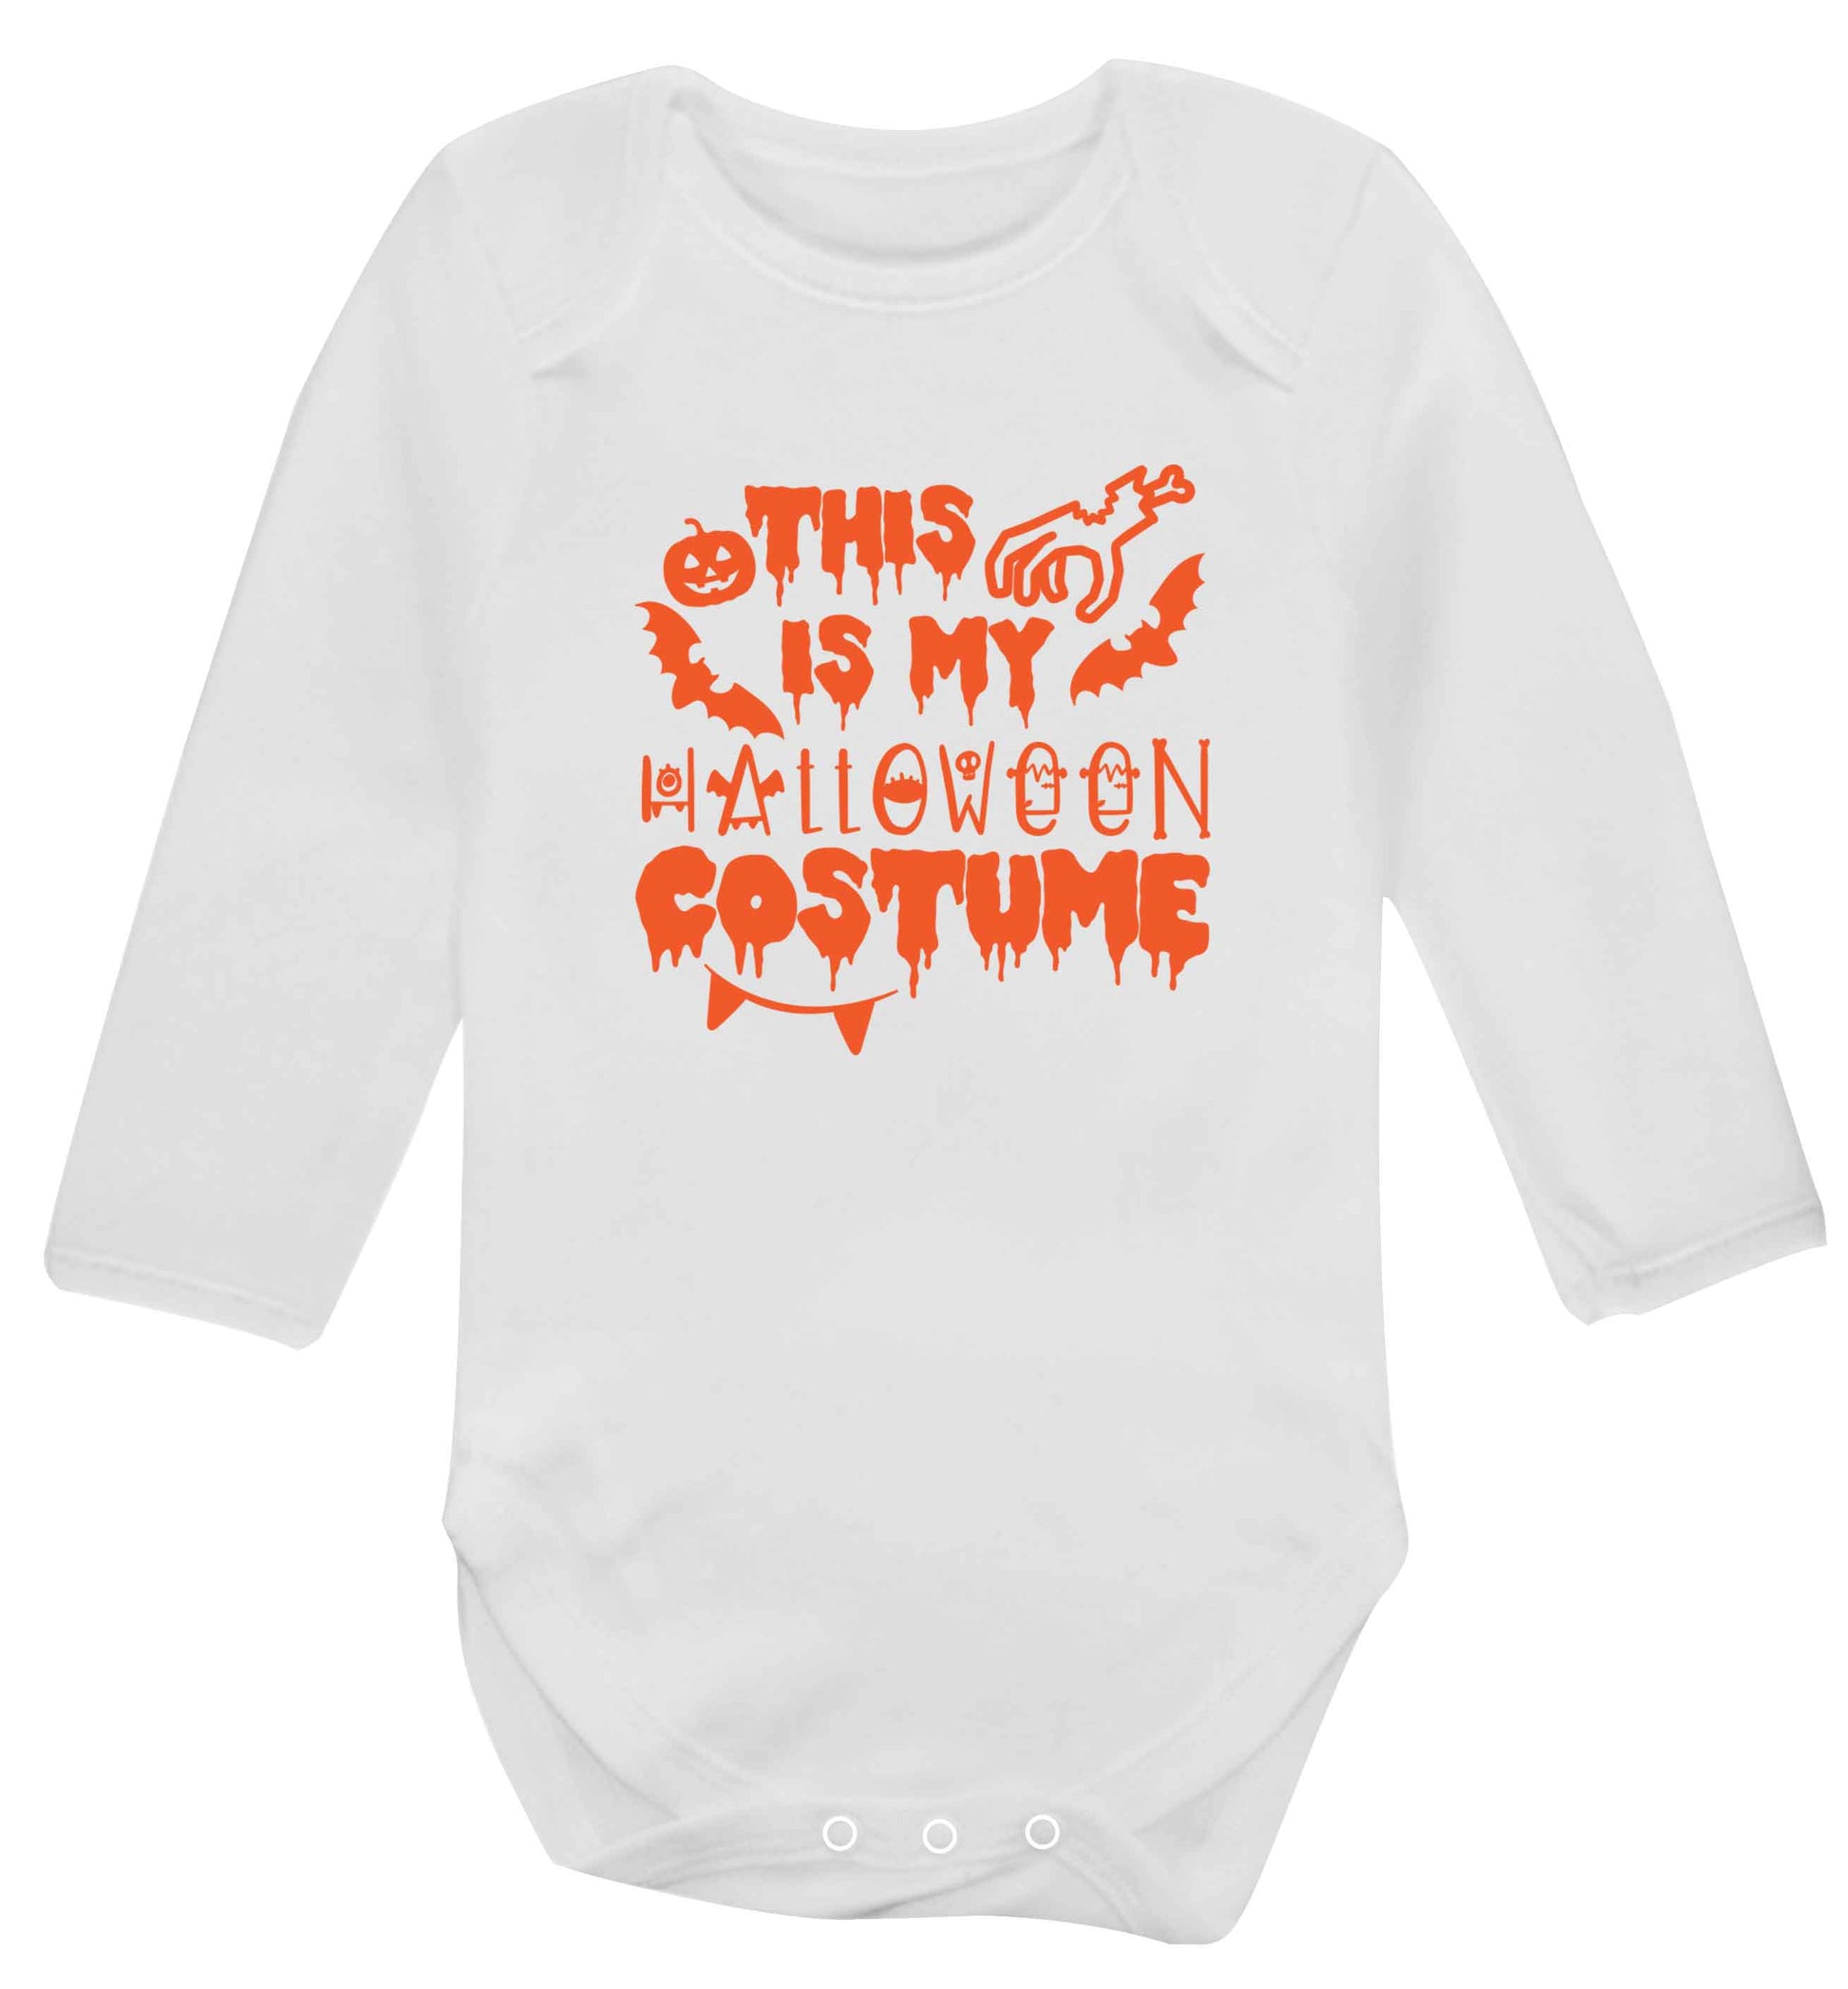 This is my halloween costume baby vest long sleeved white 6-12 months